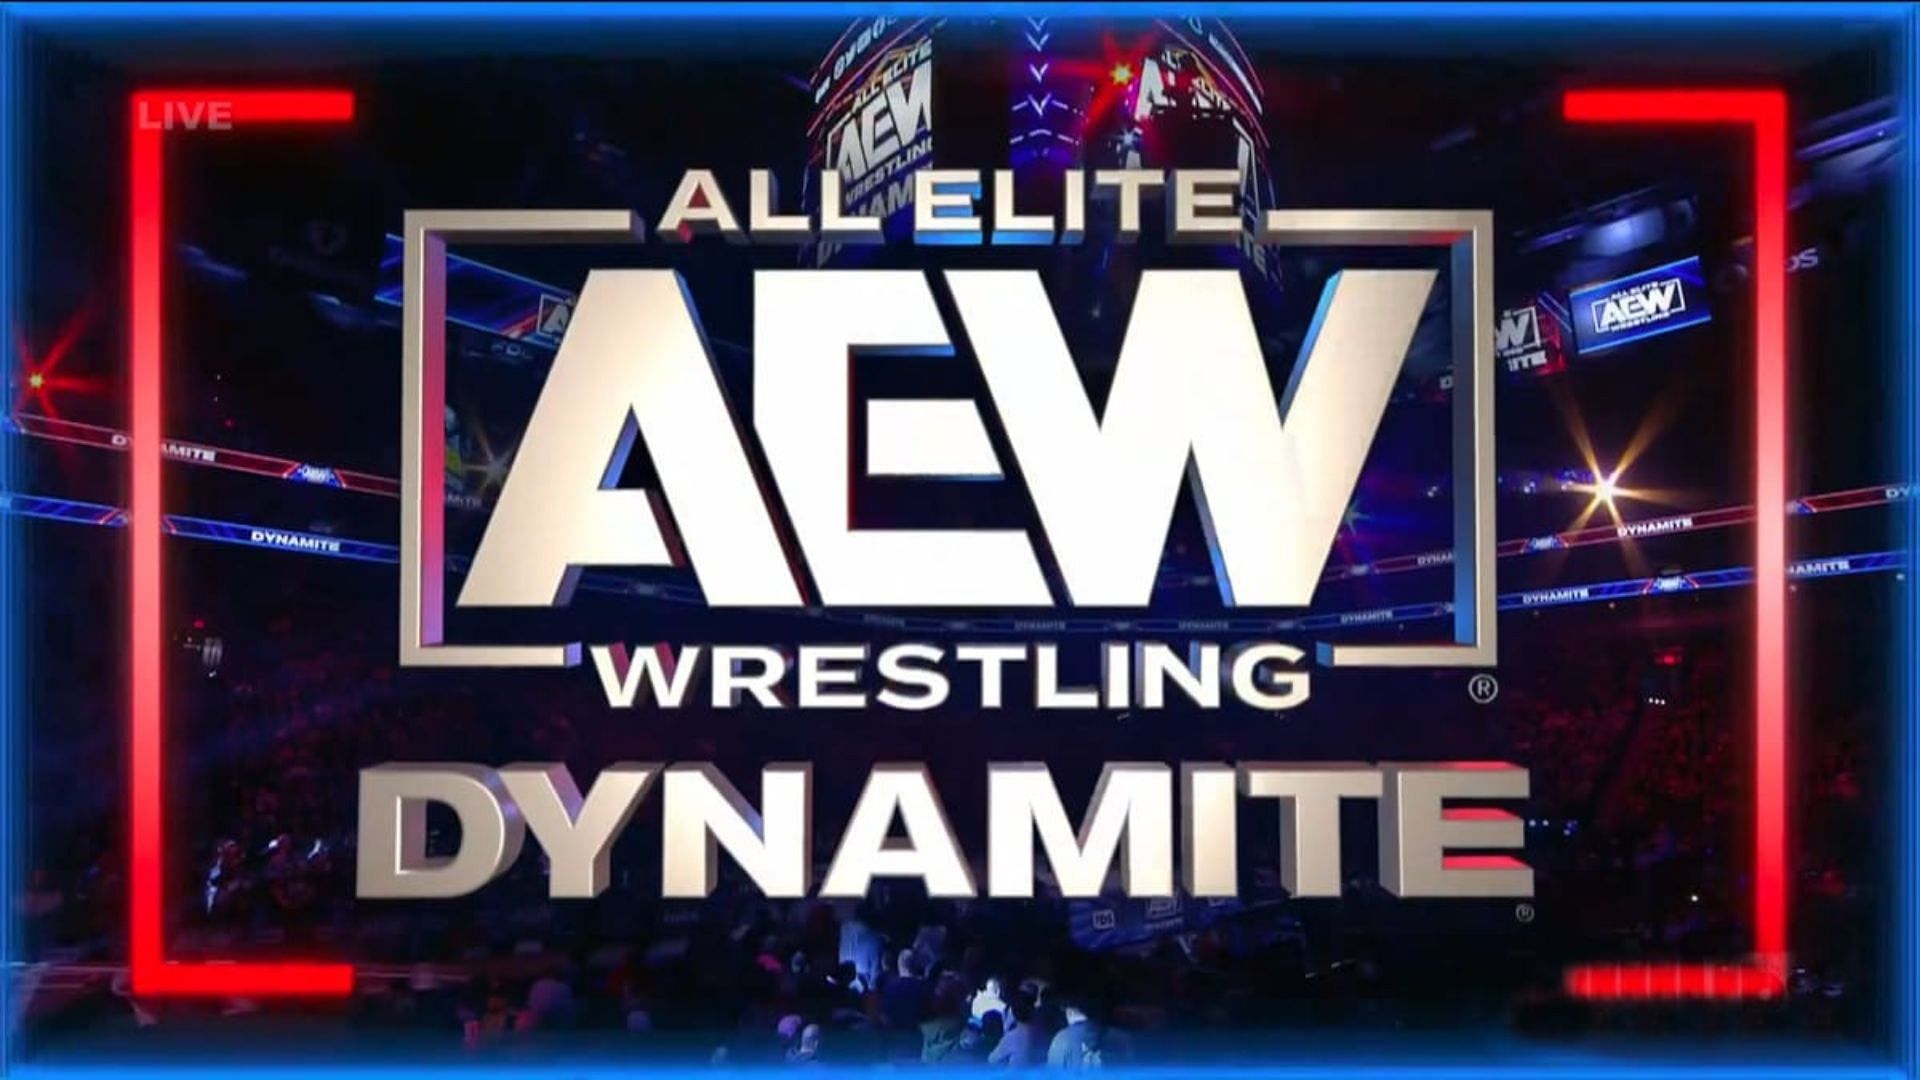 Which popular AEW star got busted open on Dynamite?